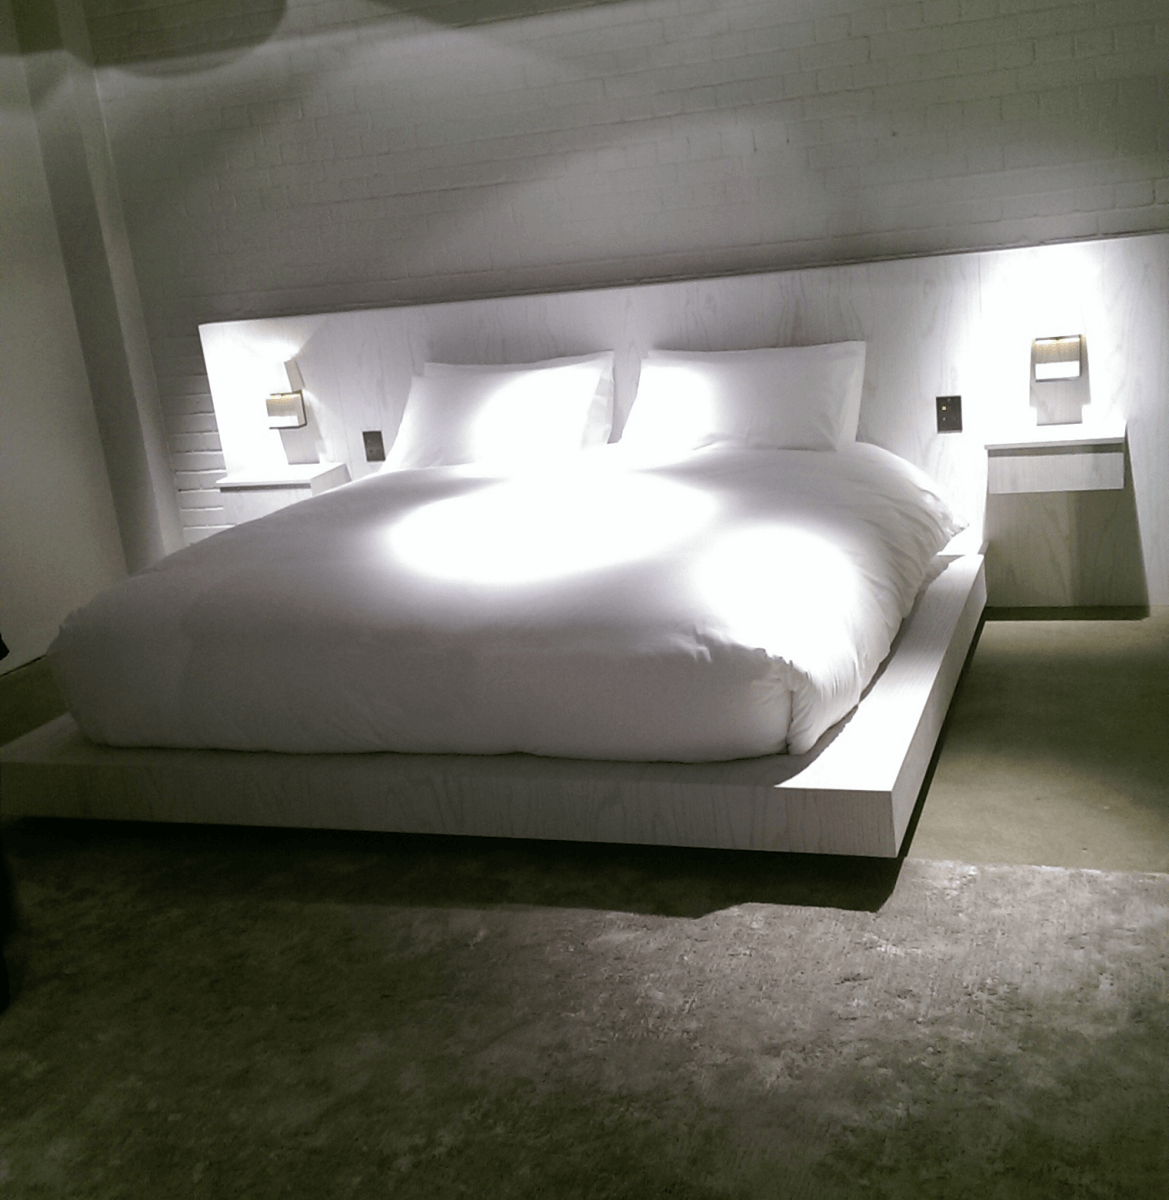 Low bed with integrated bedside lamps